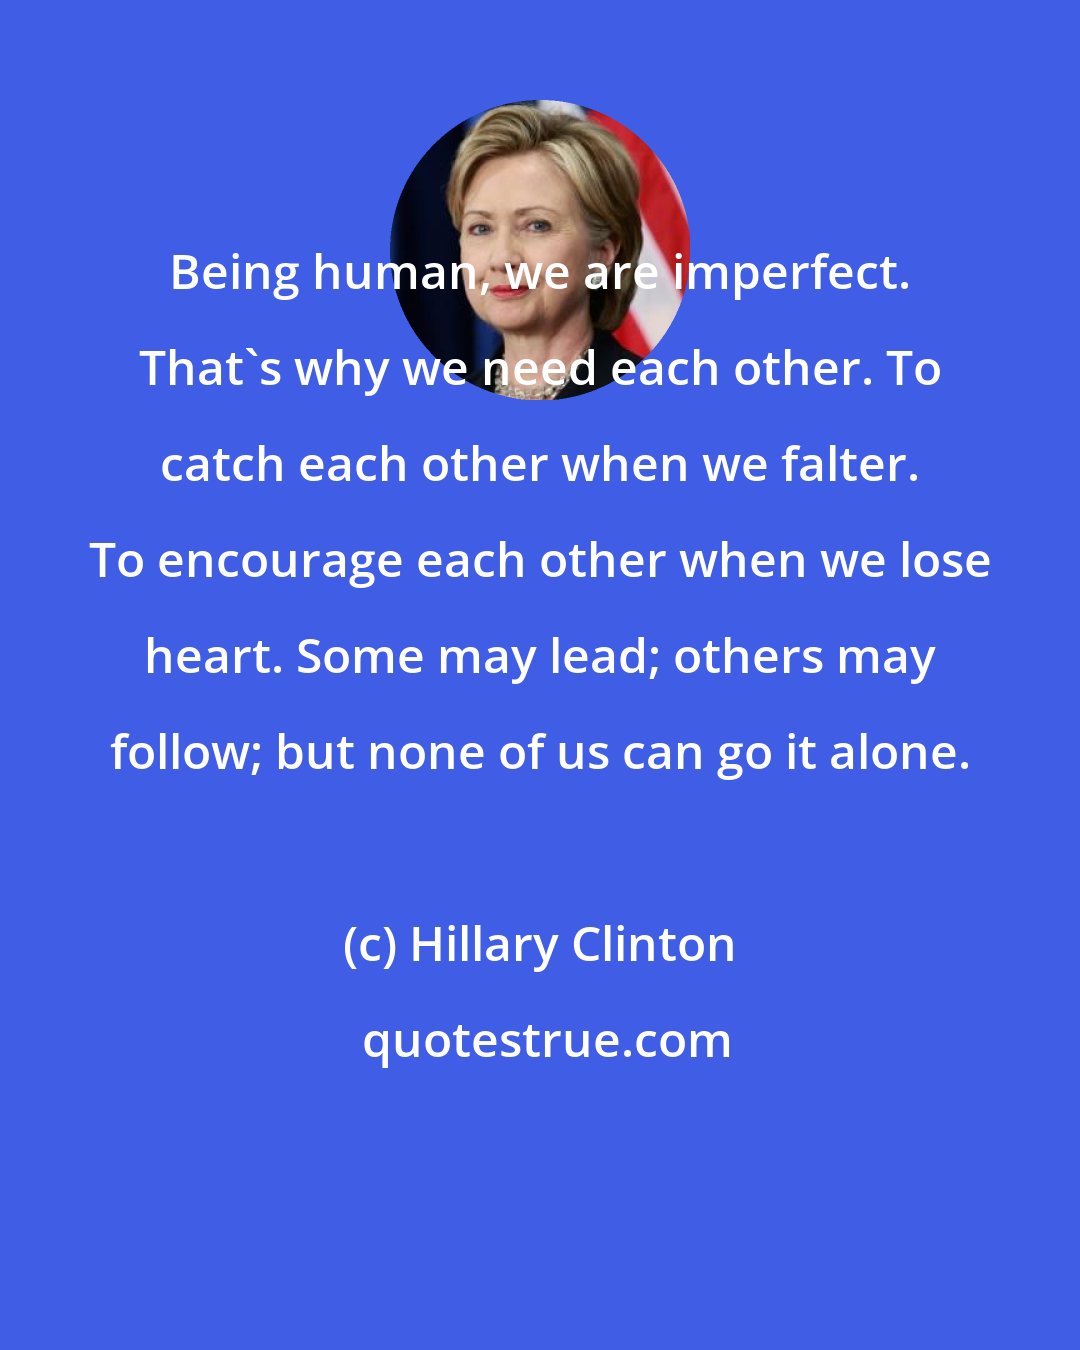 Hillary Clinton: Being human, we are imperfect. That's why we need each other. To catch each other when we falter. To encourage each other when we lose heart. Some may lead; others may follow; but none of us can go it alone.